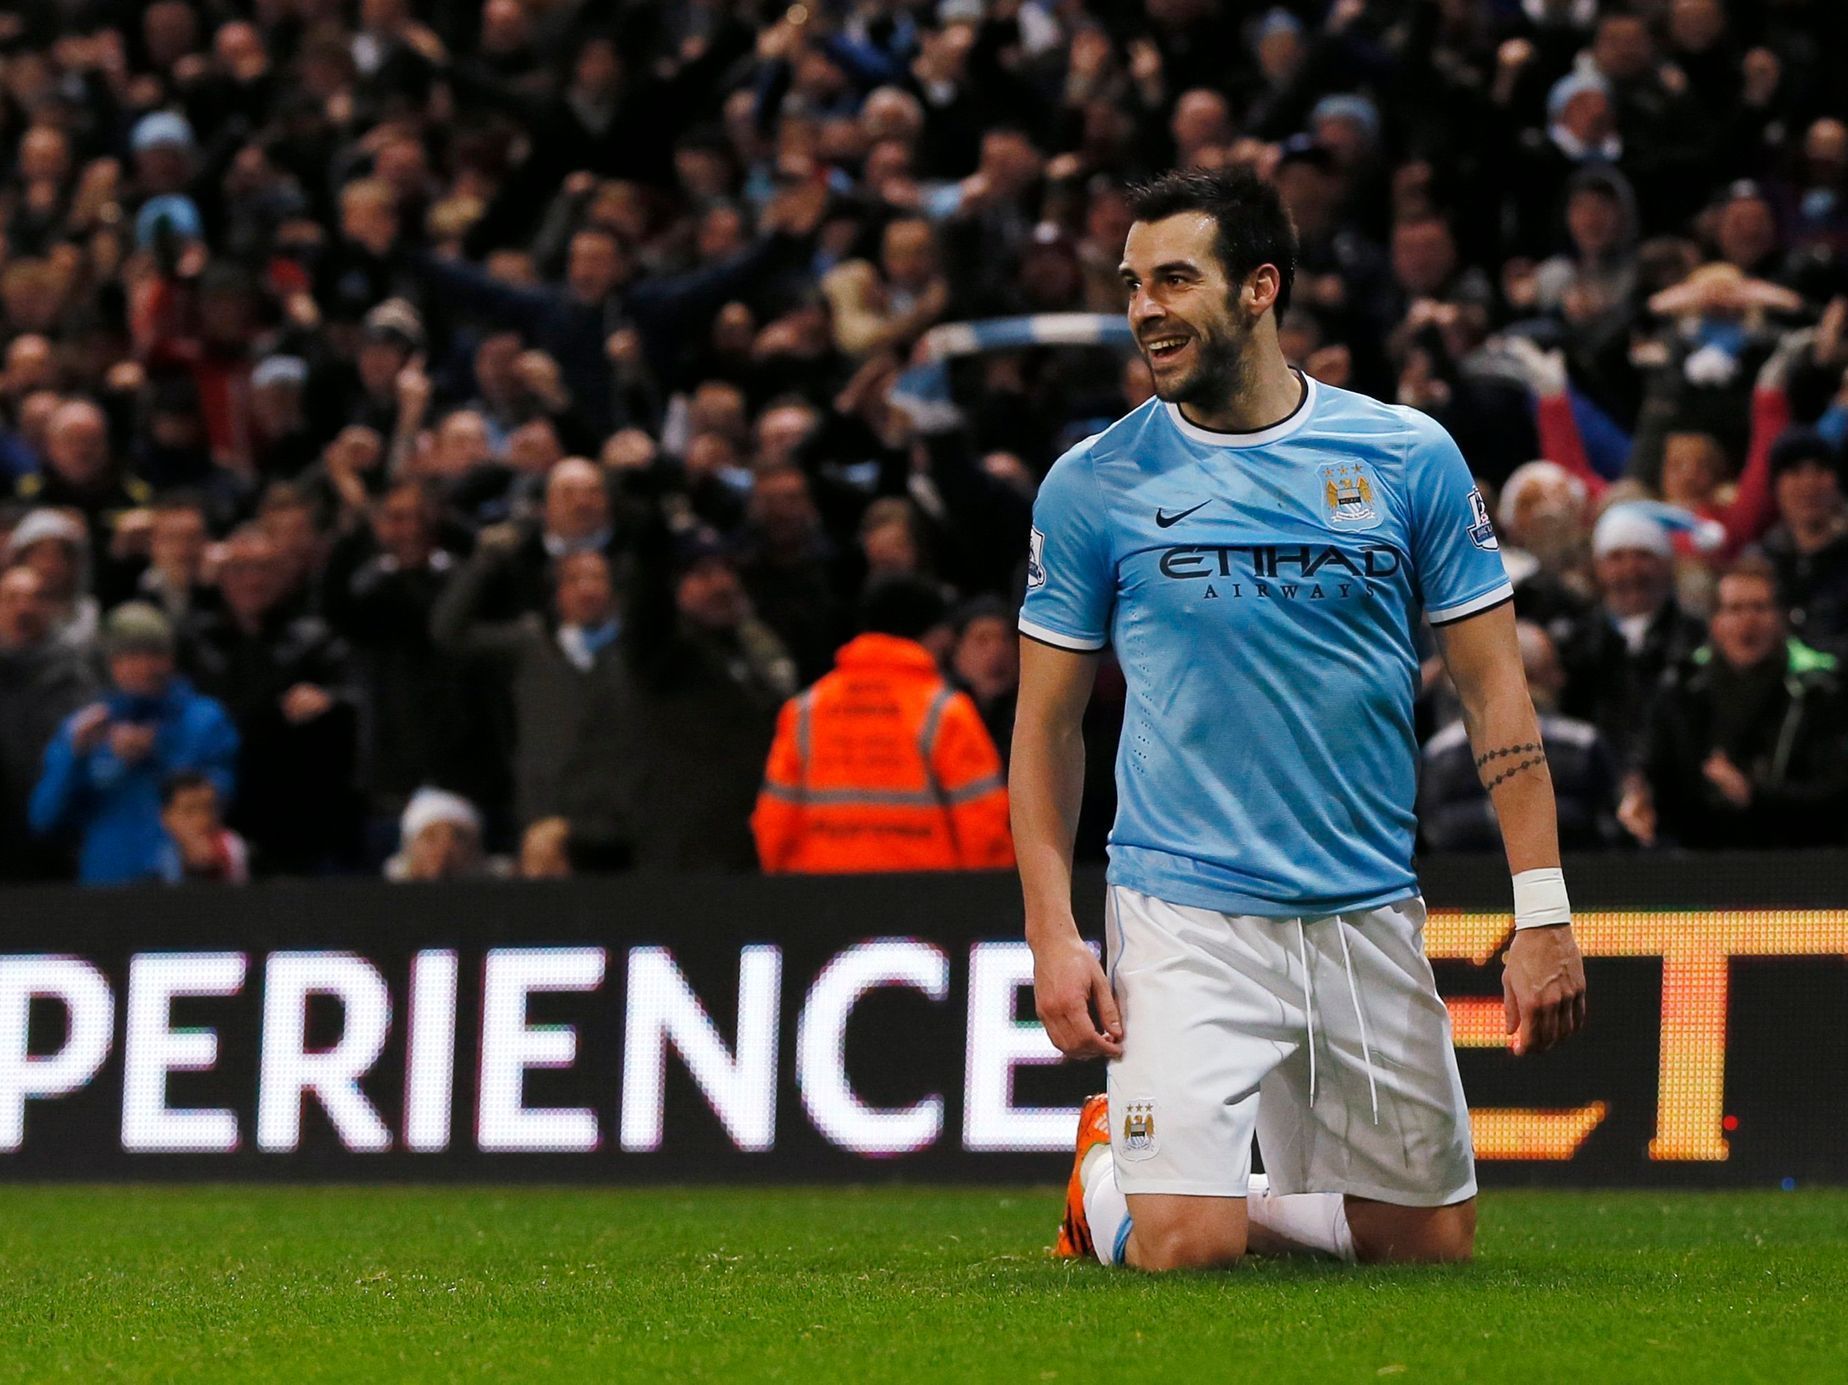 Manchester City's Negredo celebrates after scoring a goal against Liverpool during their English Premier League soccer match in Manchester